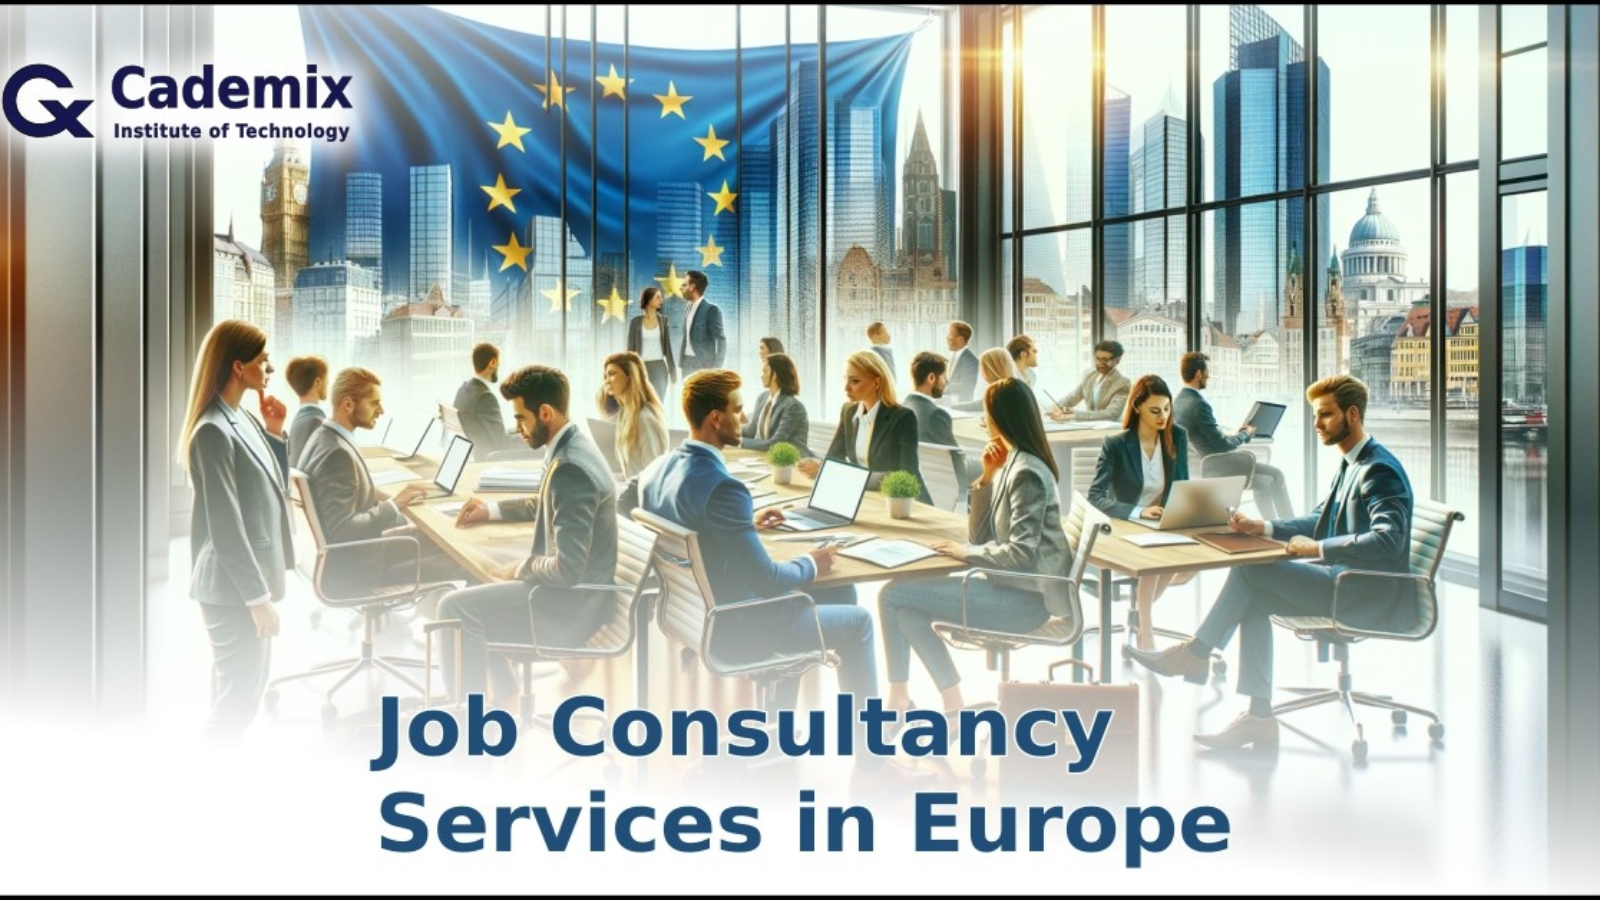 Job Consultancy Services in Europe